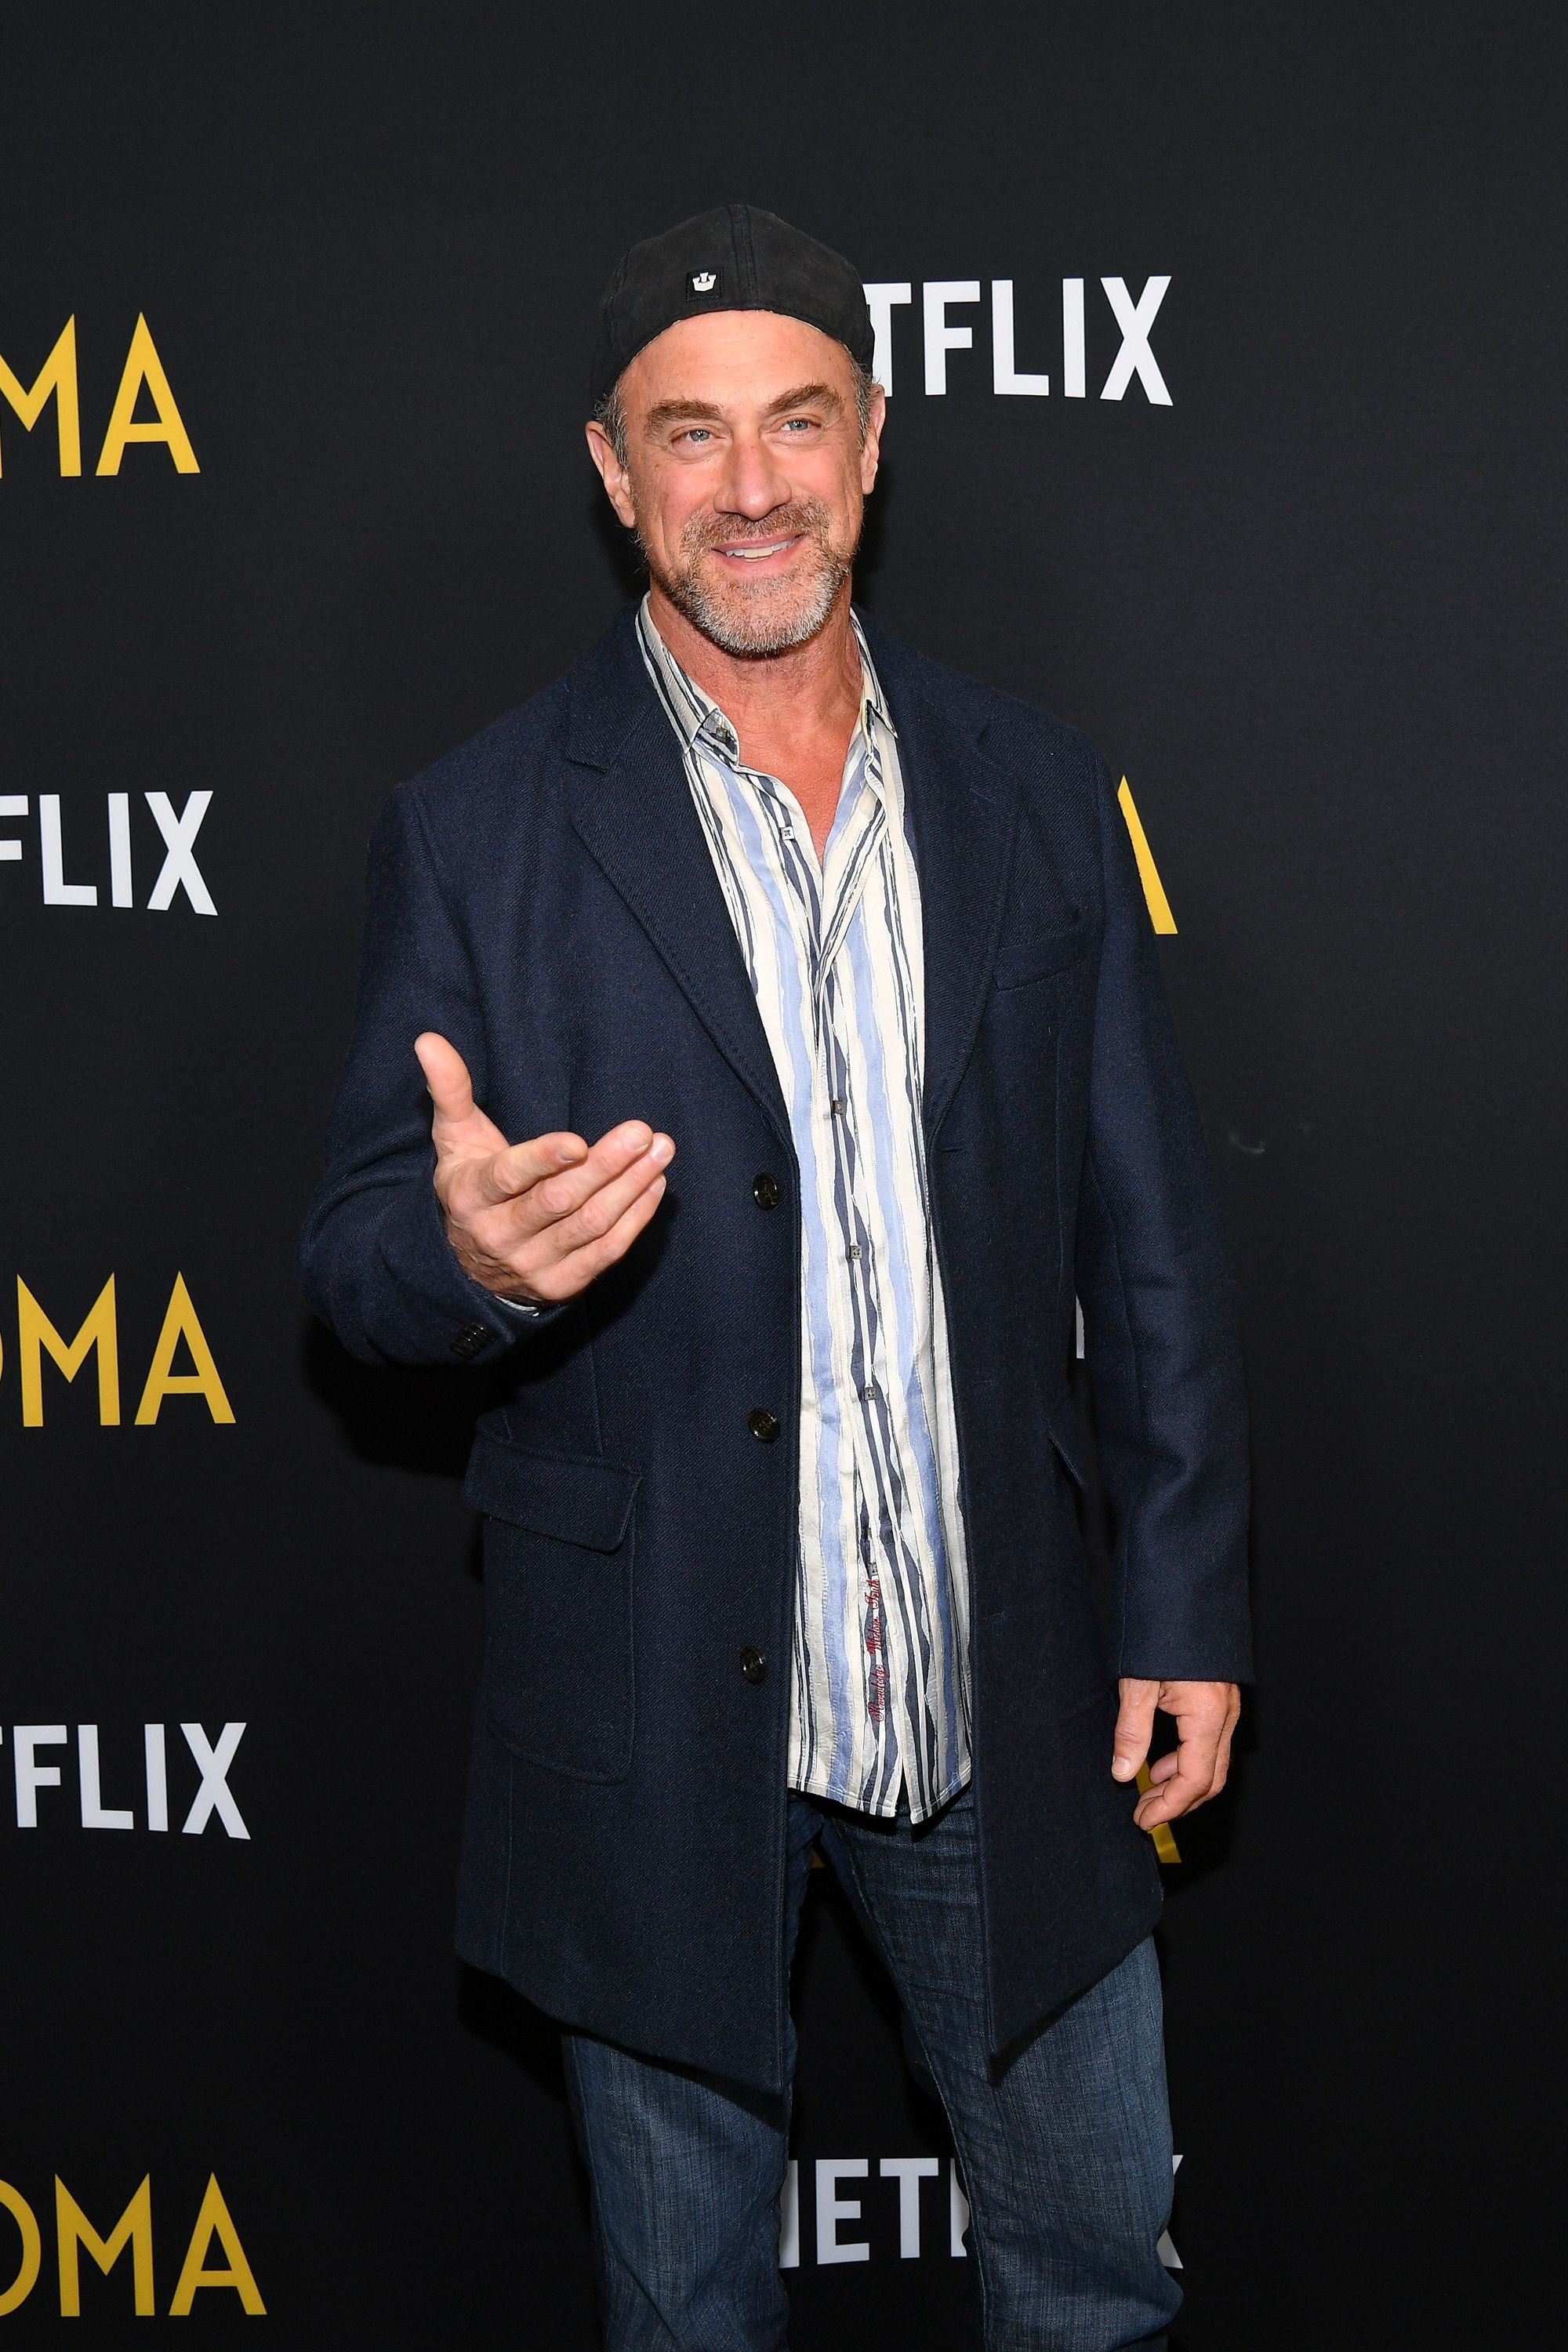 Christopher Meloni at the "Roma" New York screening at DGA Theater on November 27, 2018 | Getty Images